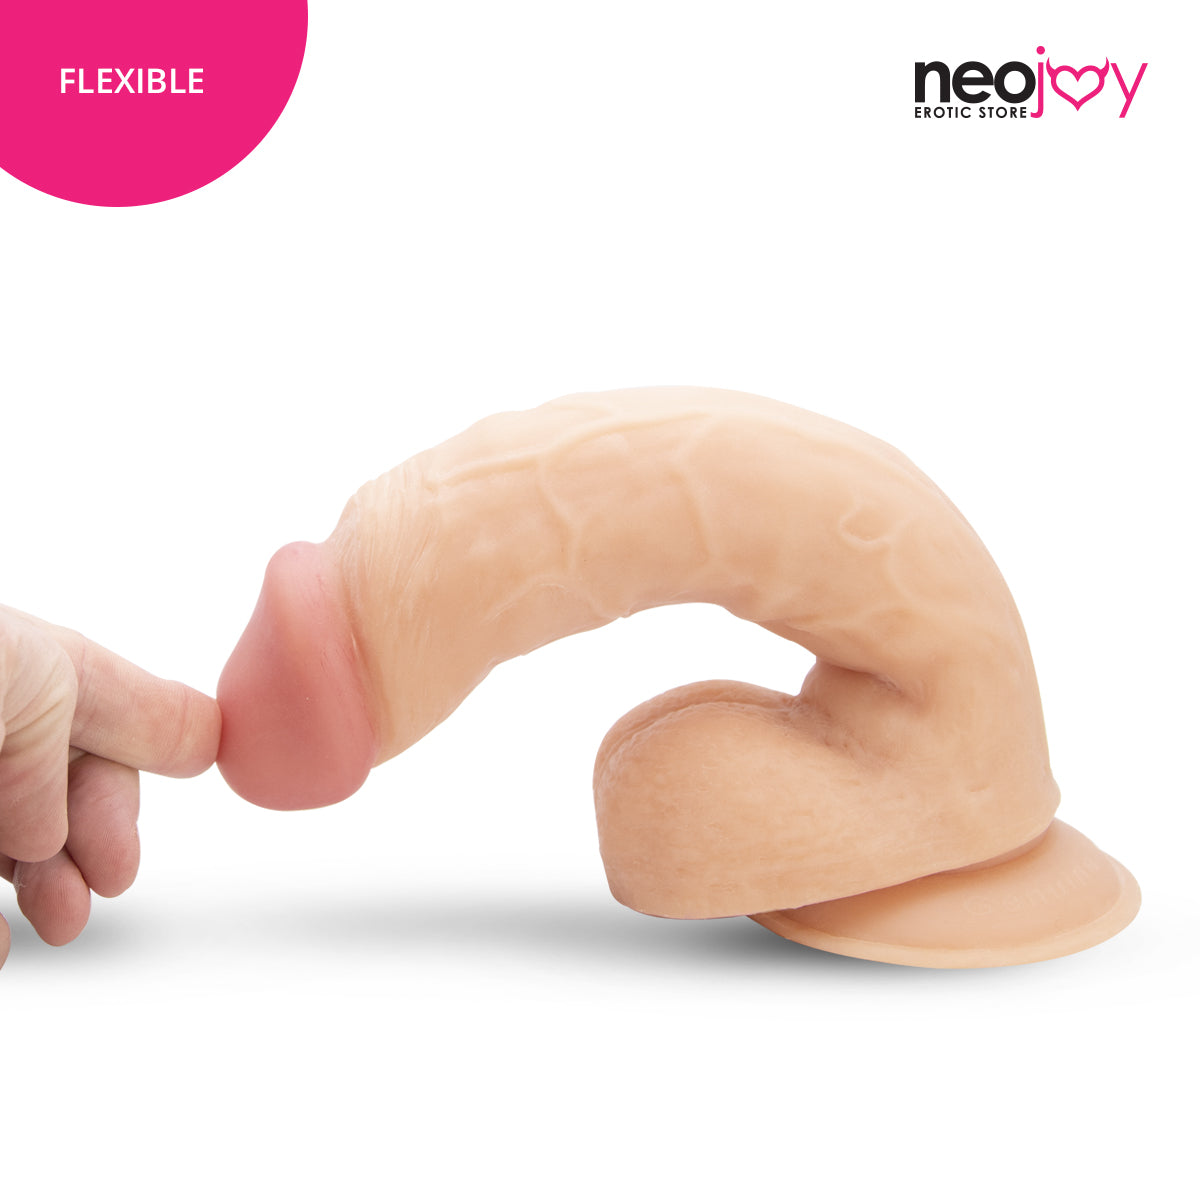 Neojoy - Takeover Lover Dildo With Strap-On Dong Pegging - Flesh - 24cm - 9.4 inch